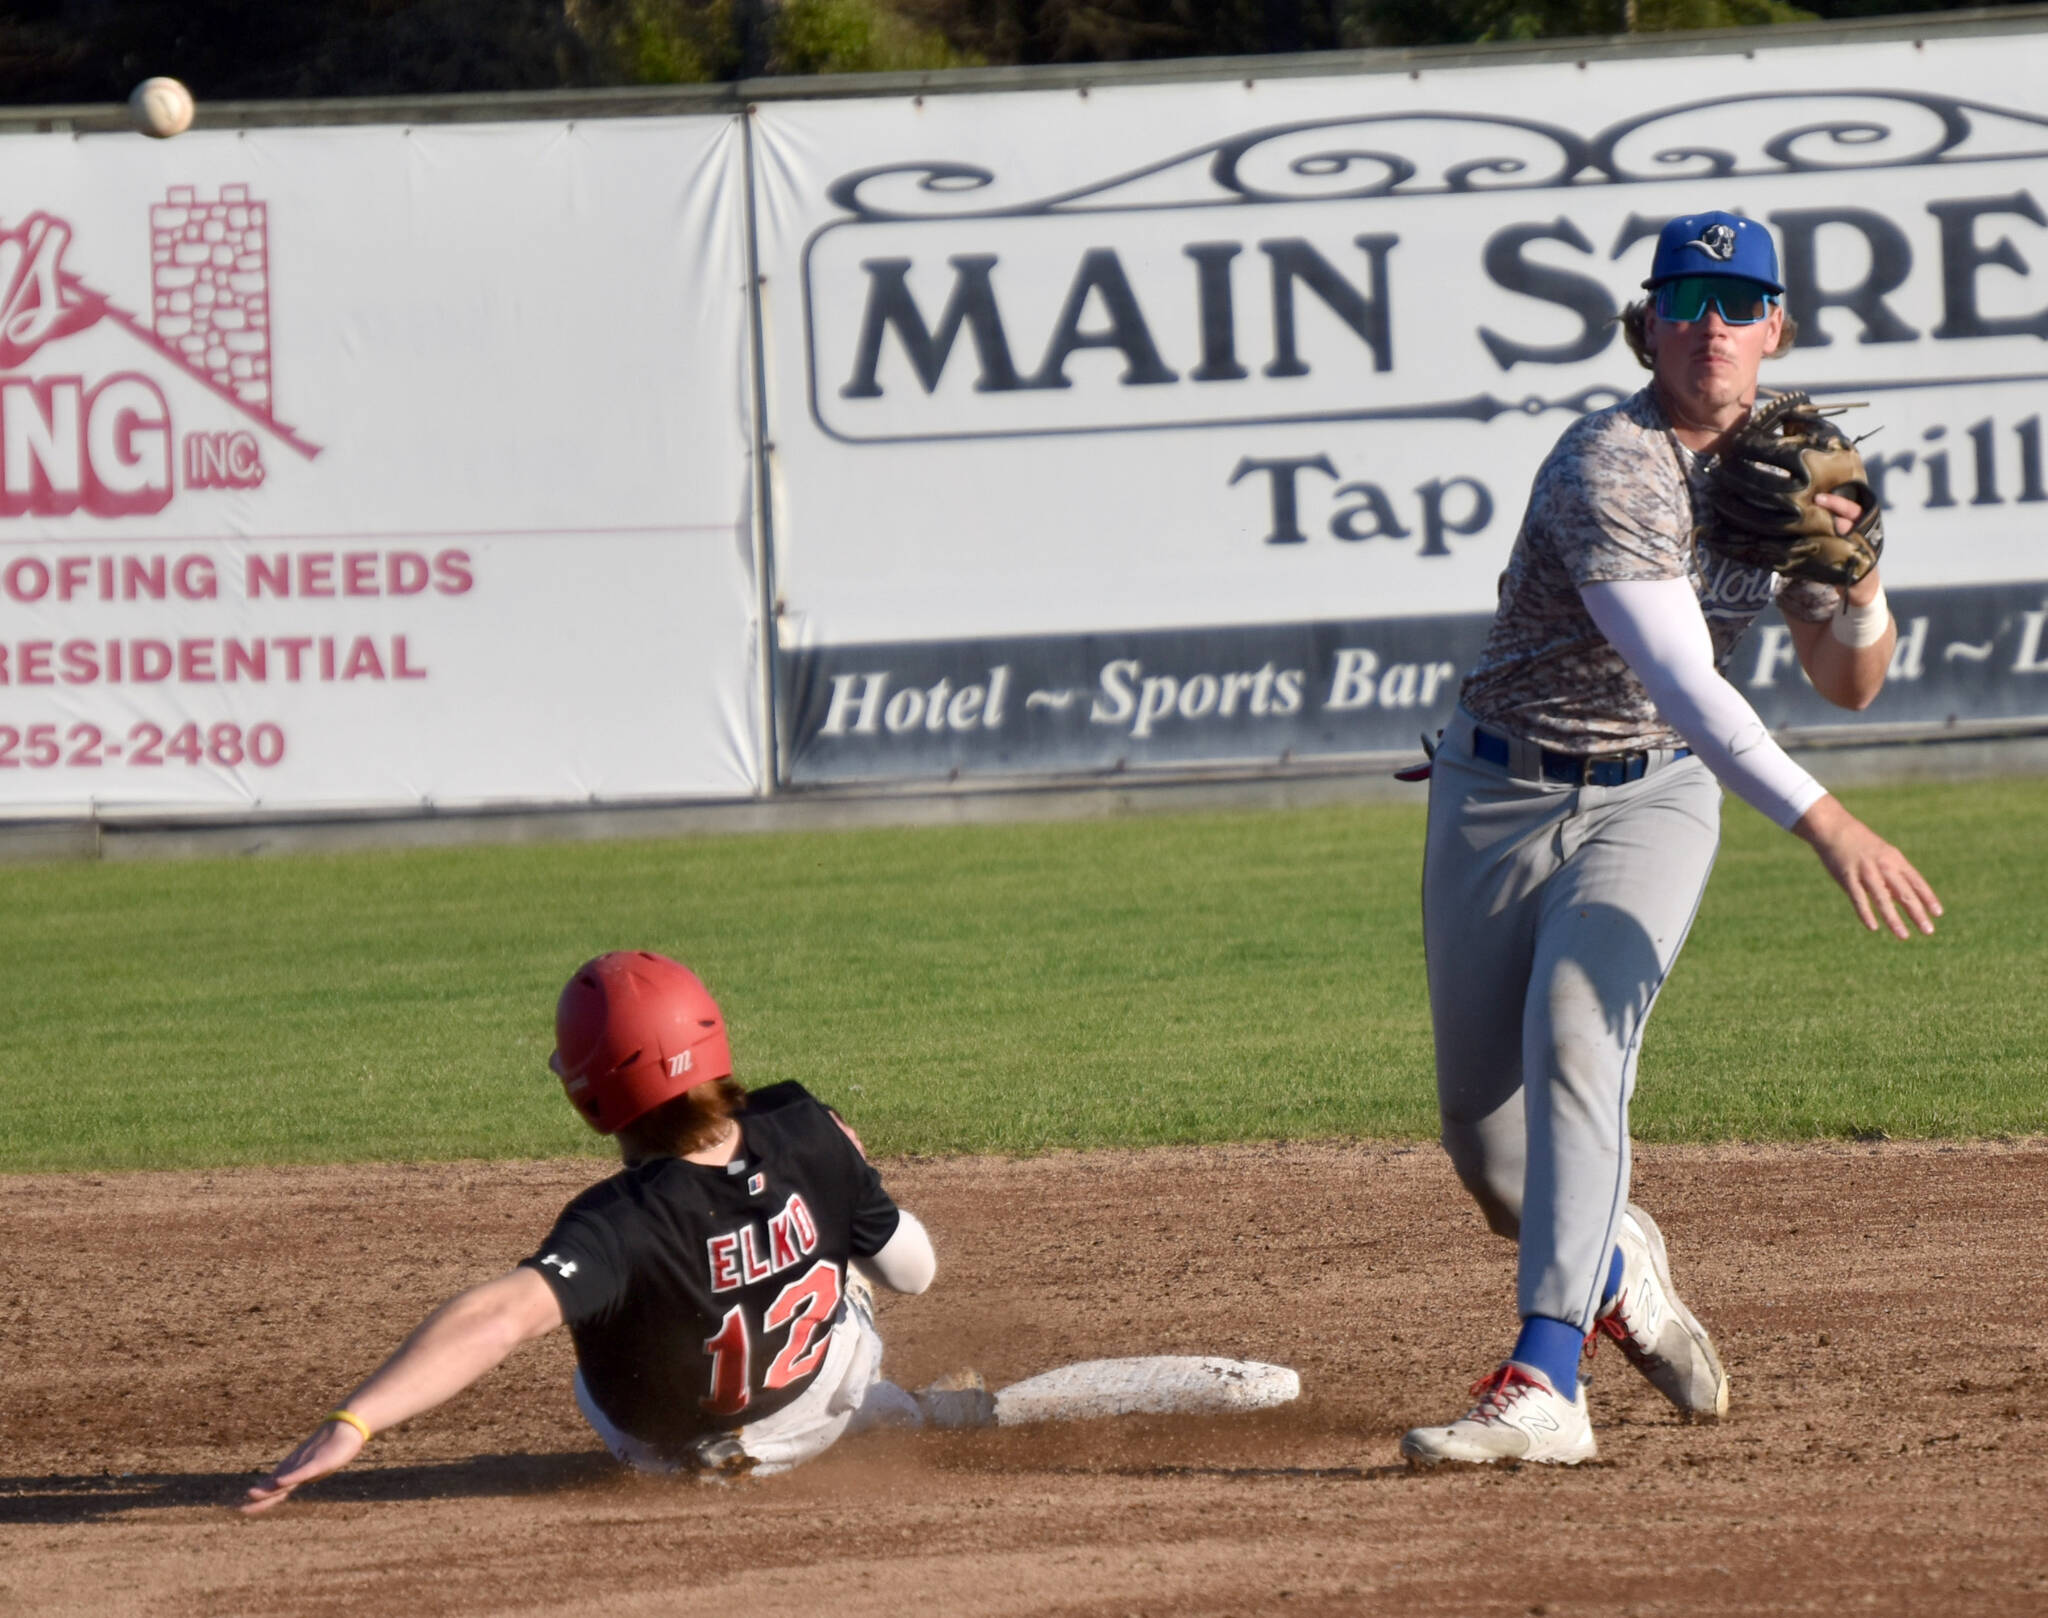 Shaun Montoya of the Anchorage Glacier Pilots turns a double play in front of Michael Elko of the Peninsula Oilers on Saturday, July 22, 2023, at Coral Seymour Memorial Park in Kenai, Alaska. (Photo by Jeff Helminiak/Peninsula Clarion)